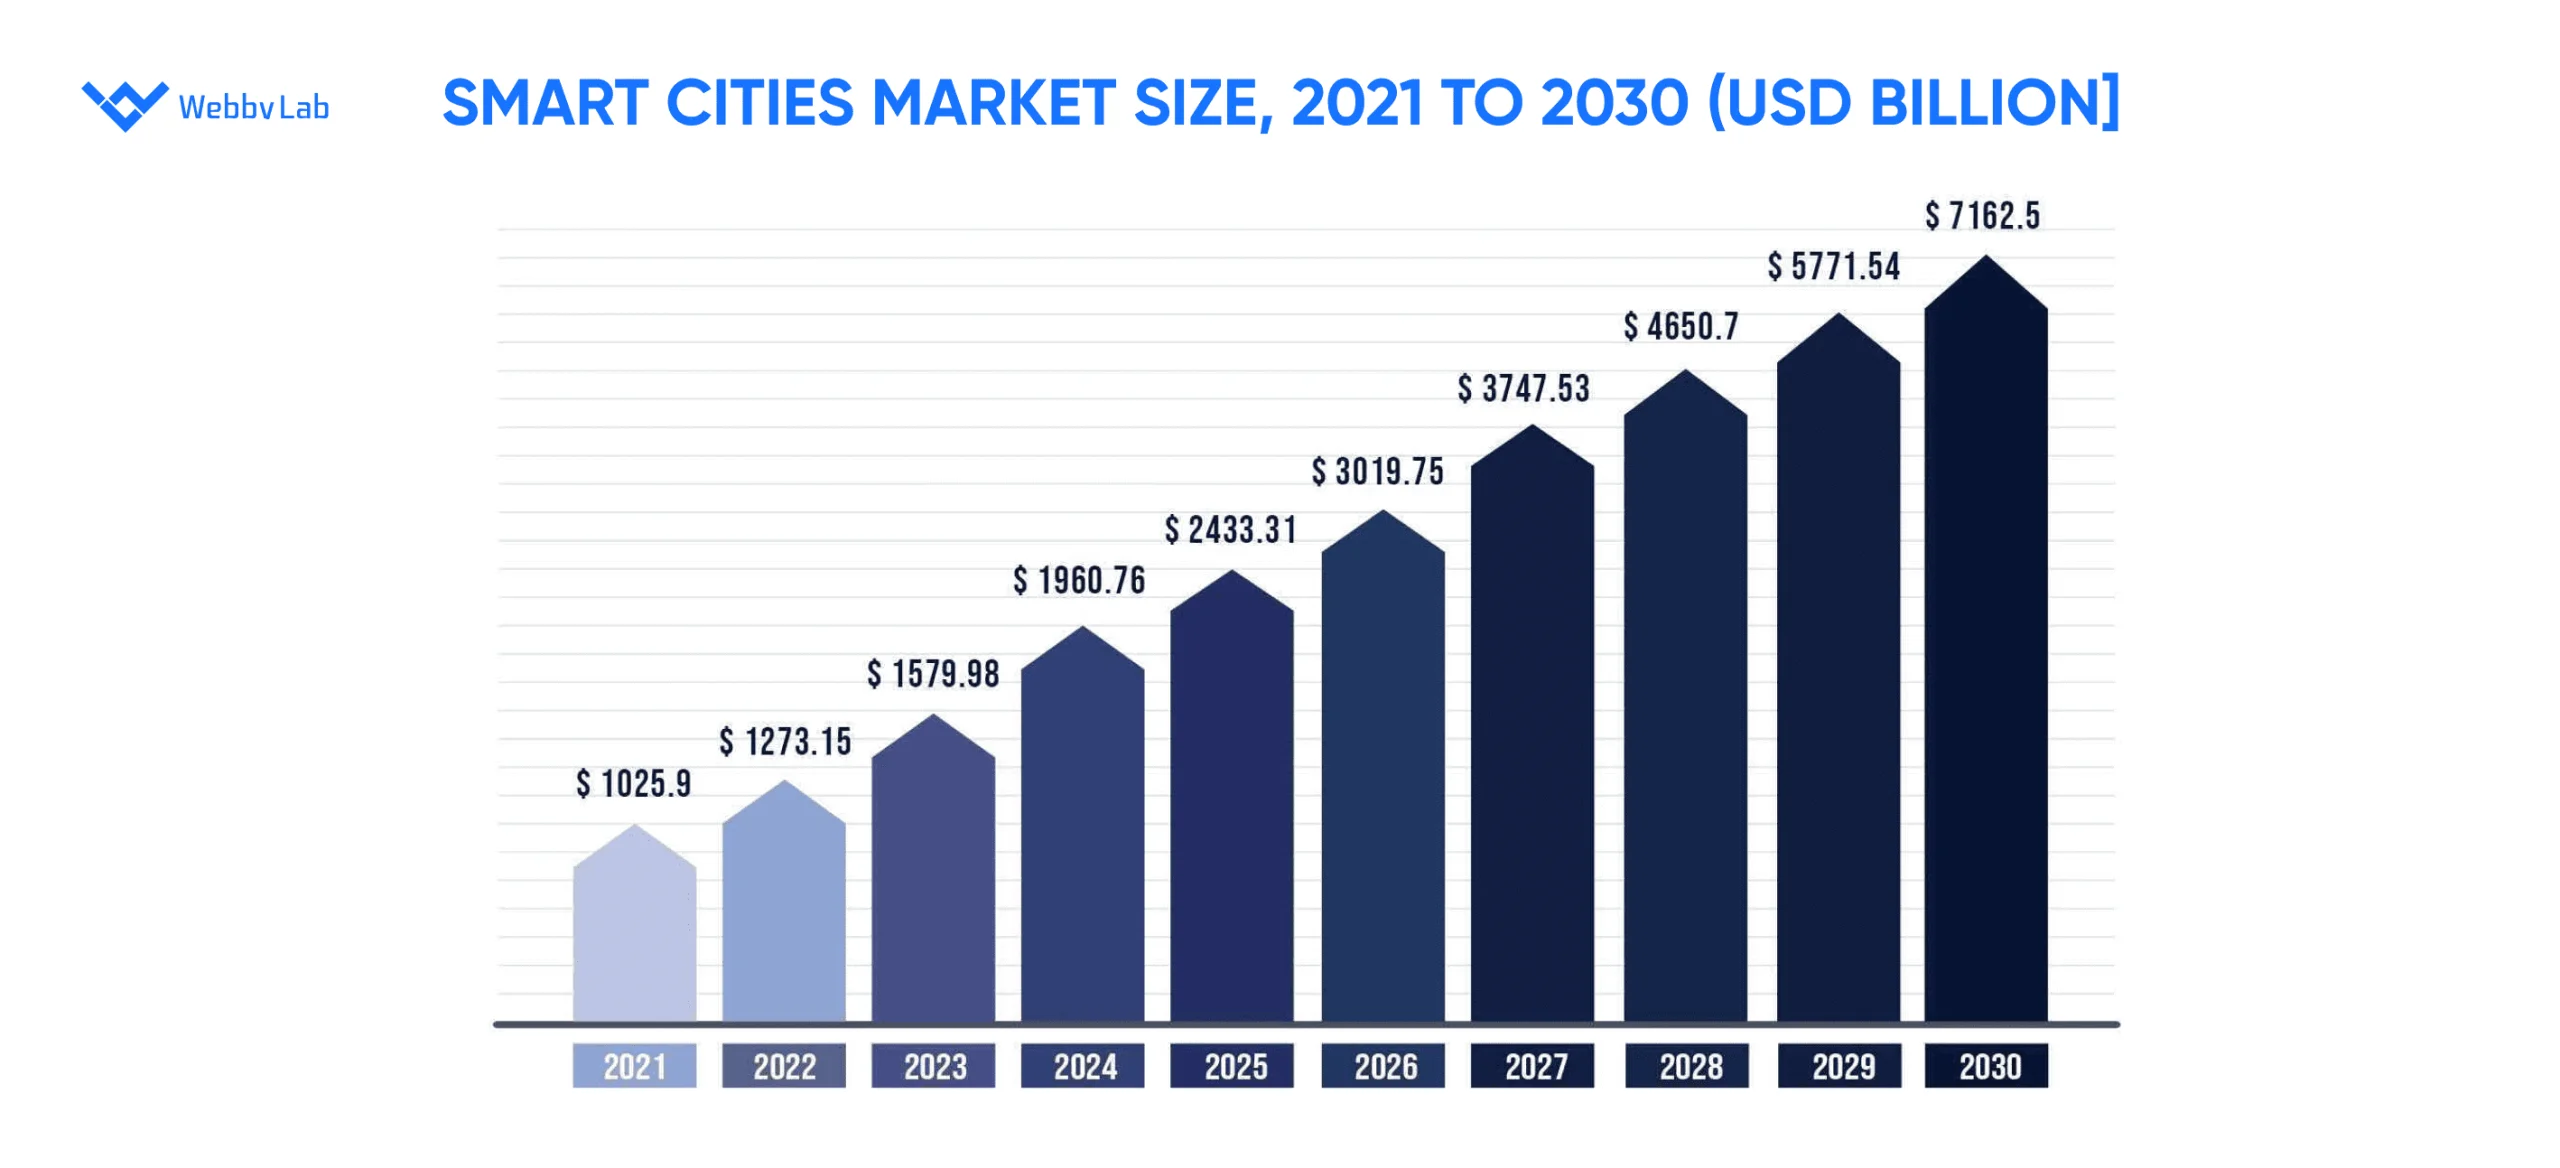 The smart cities market size from 2021 to 2030.